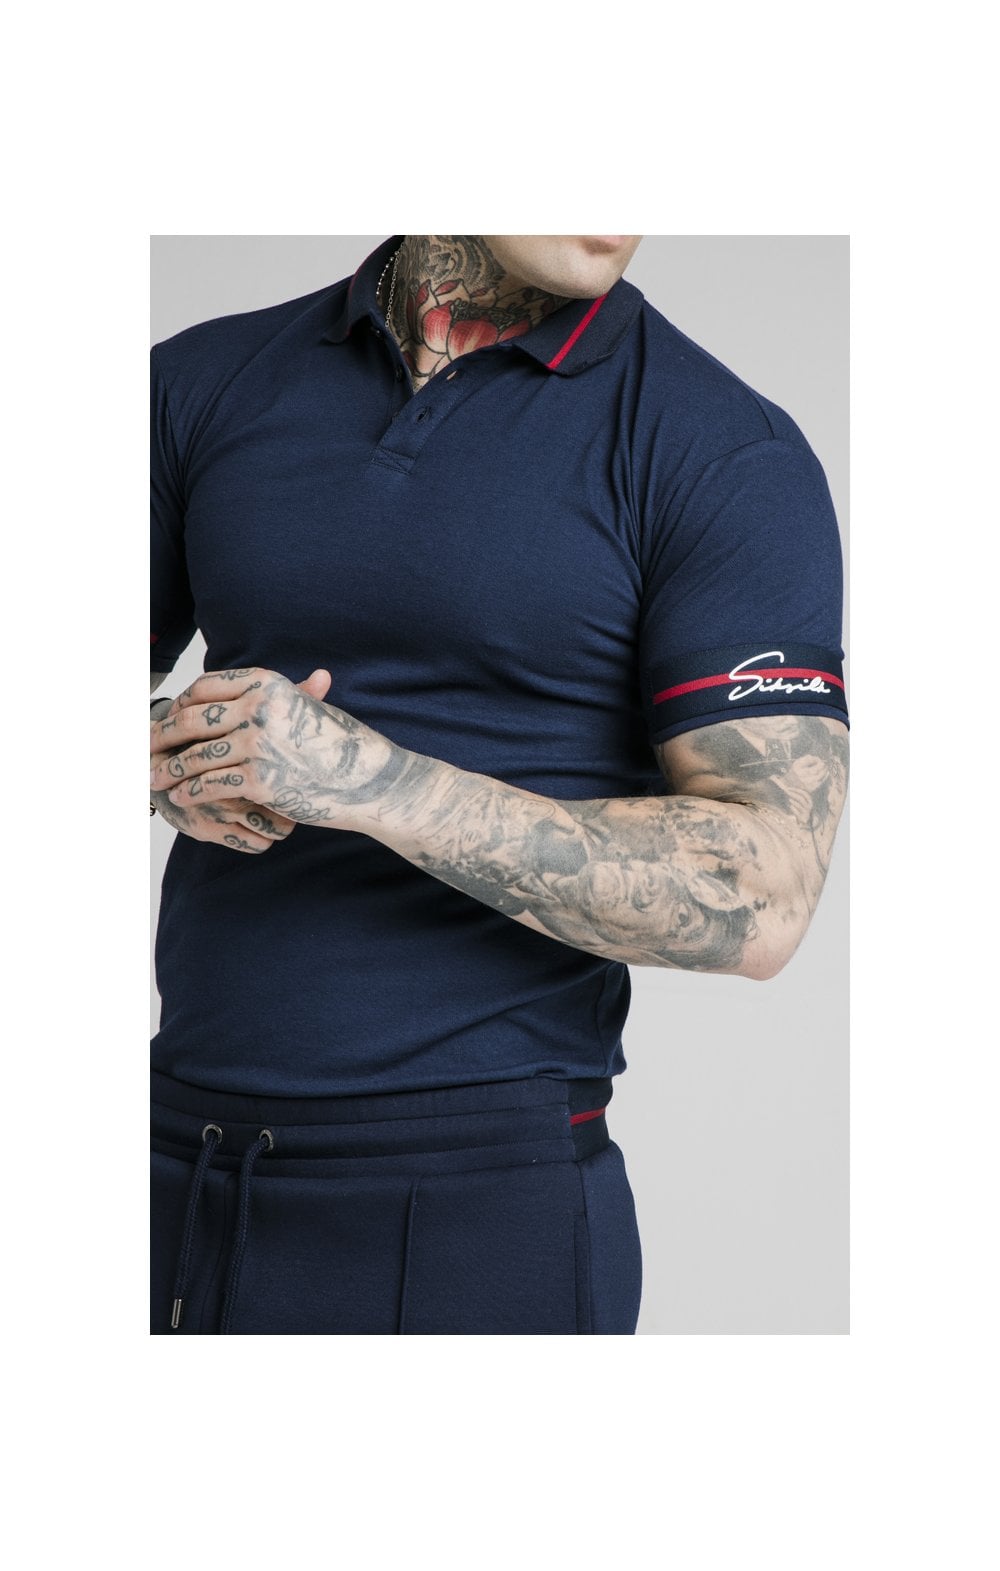 SikSilk Pique Polo Shirt Exposed Tape - Navy (1)